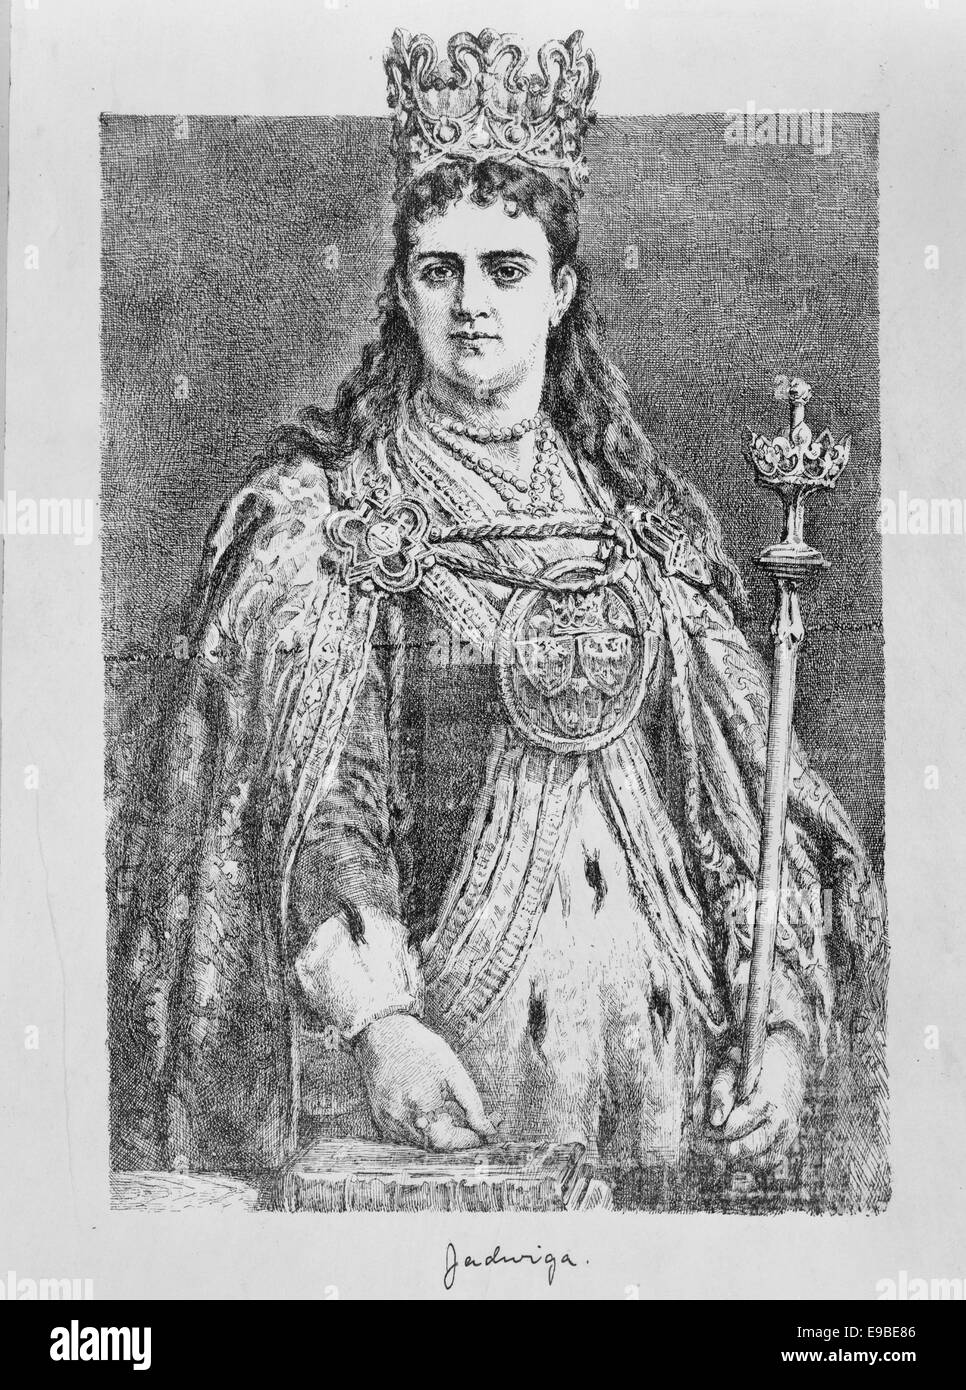 Polish Queen Jadwiga, half-length portrait, standing, facing front, wearing cape and crown, holding scepter, circa 1390 Stock Photo